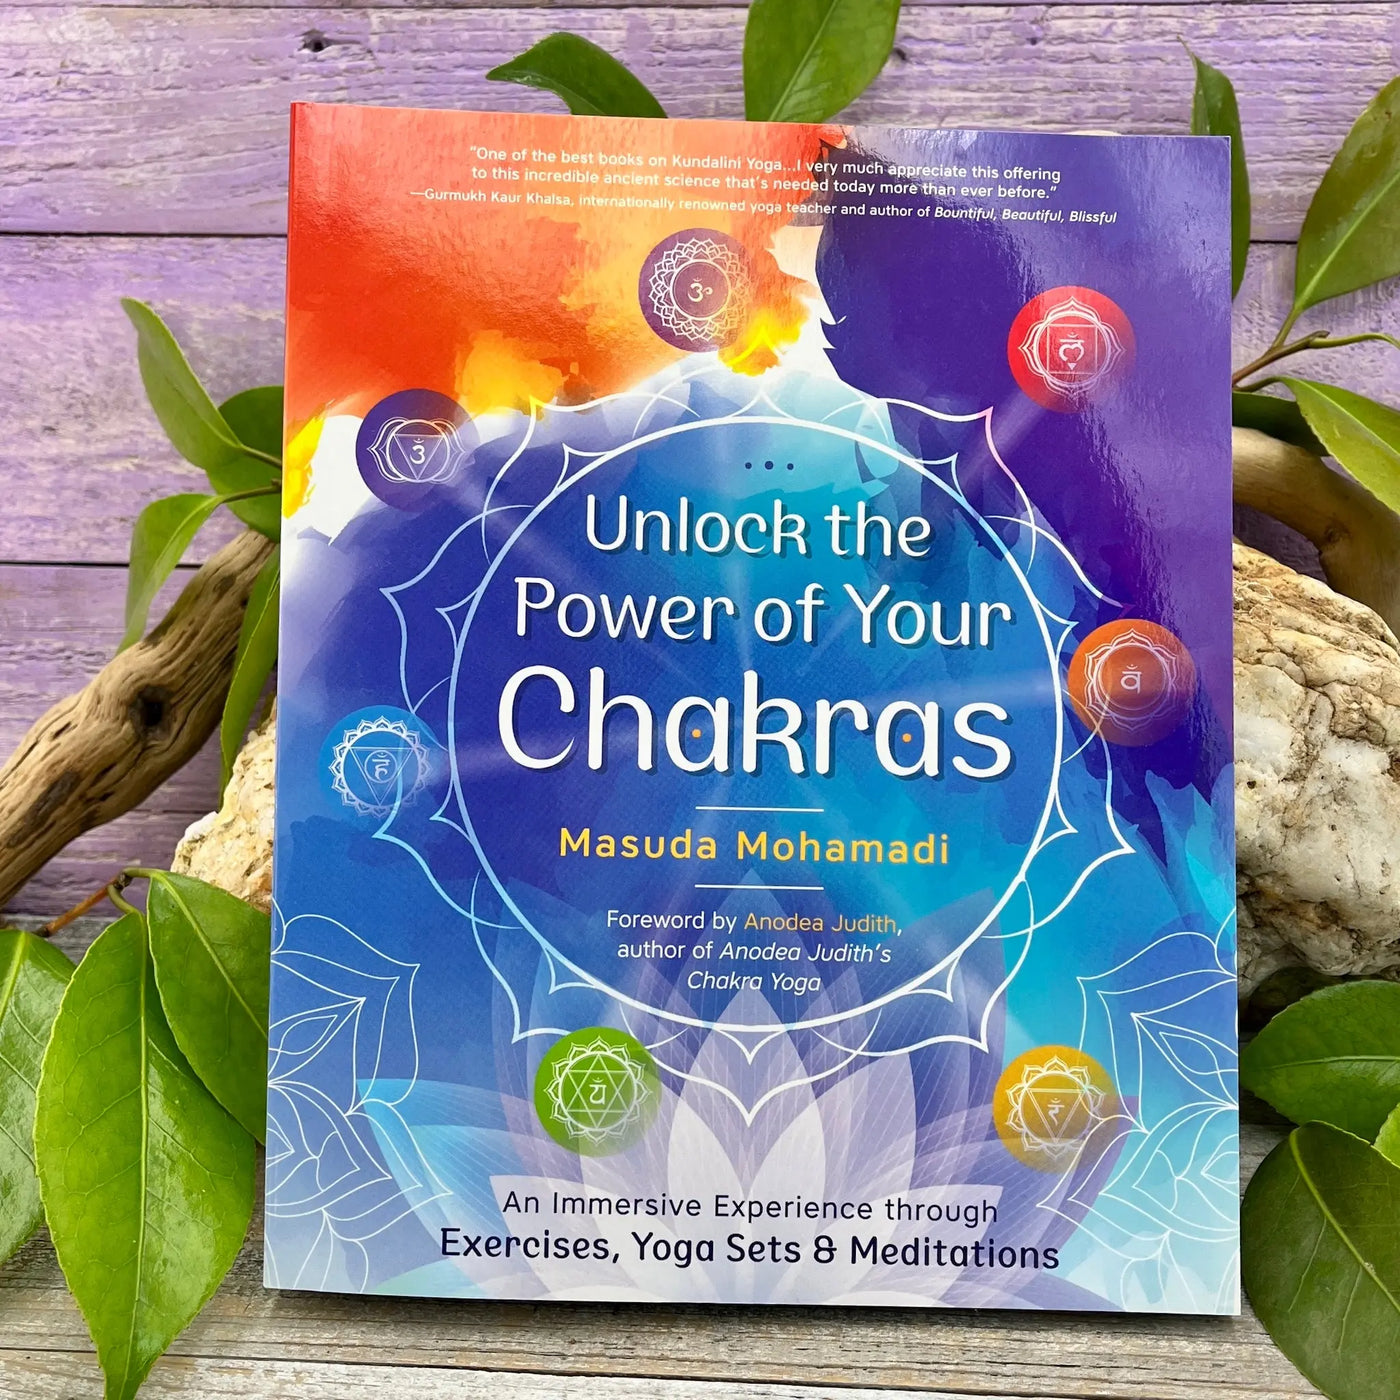 Unlock the Power of Your Chakras: An Immersive Experience through Exercises, Yoga Sets & Meditations